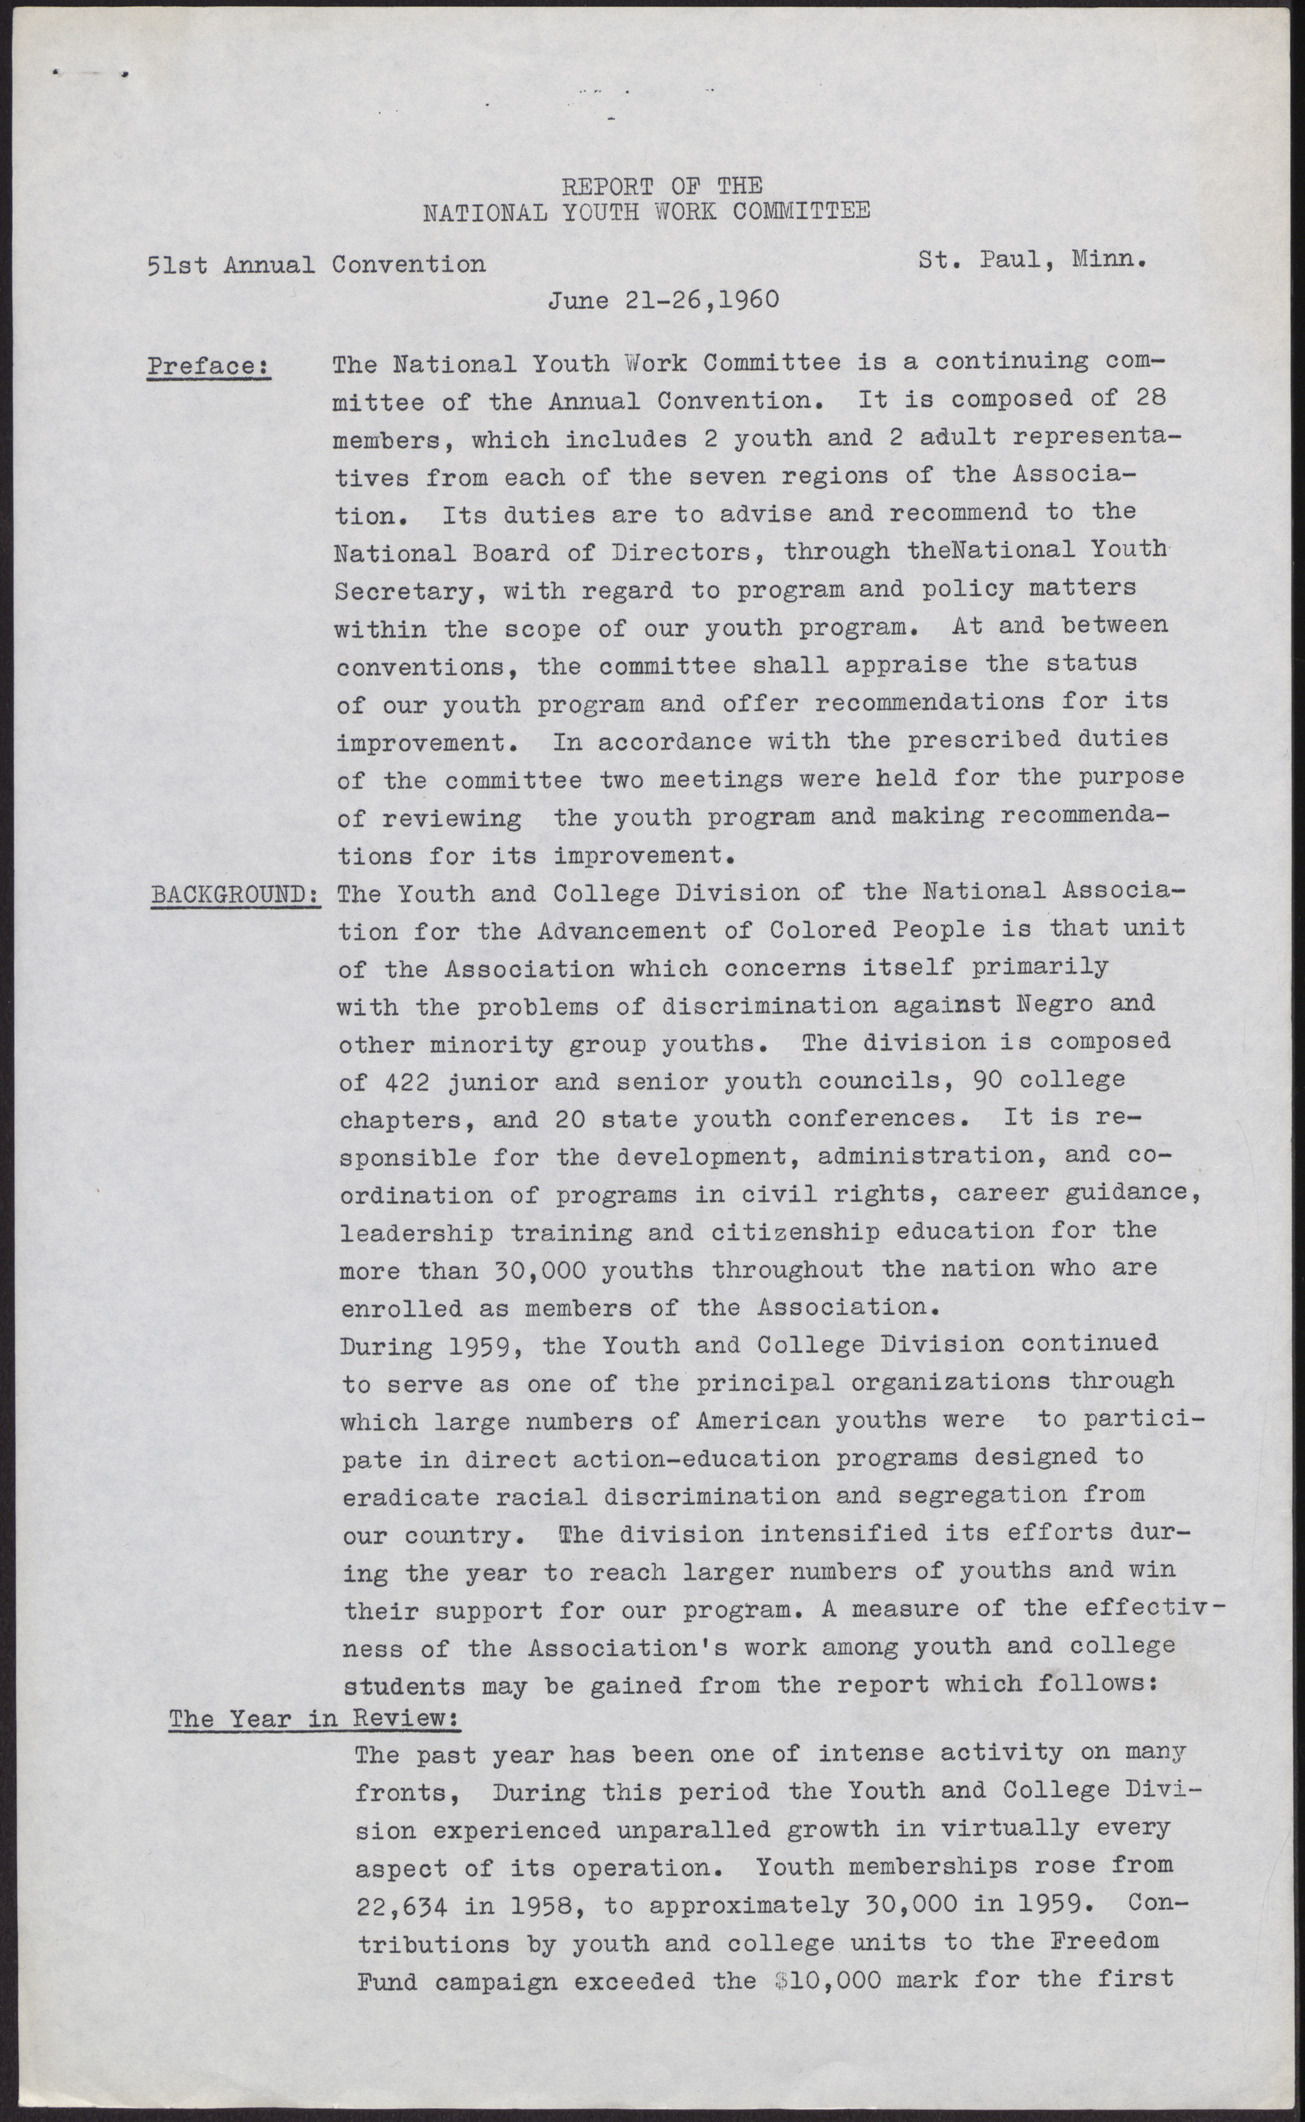 Report of the National Youth Work Committee (3 pages), June 21-26, 1960